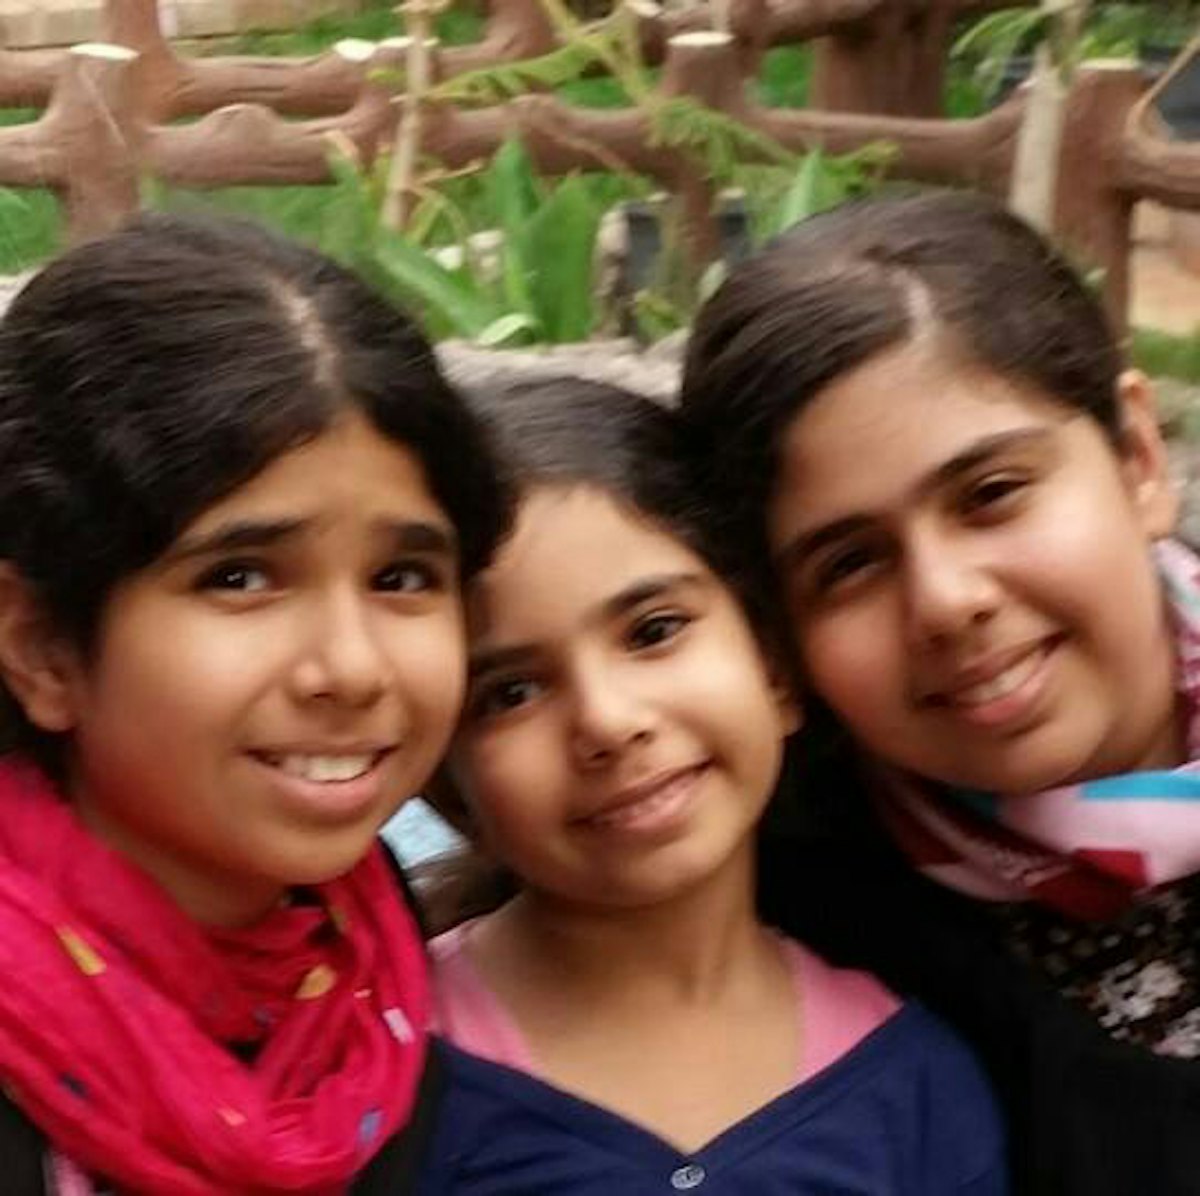 The three daughters of Hamed Kamal bin Haydara, a Baha'i in Yemen who was recently indicted after 14 months of imprisonment.